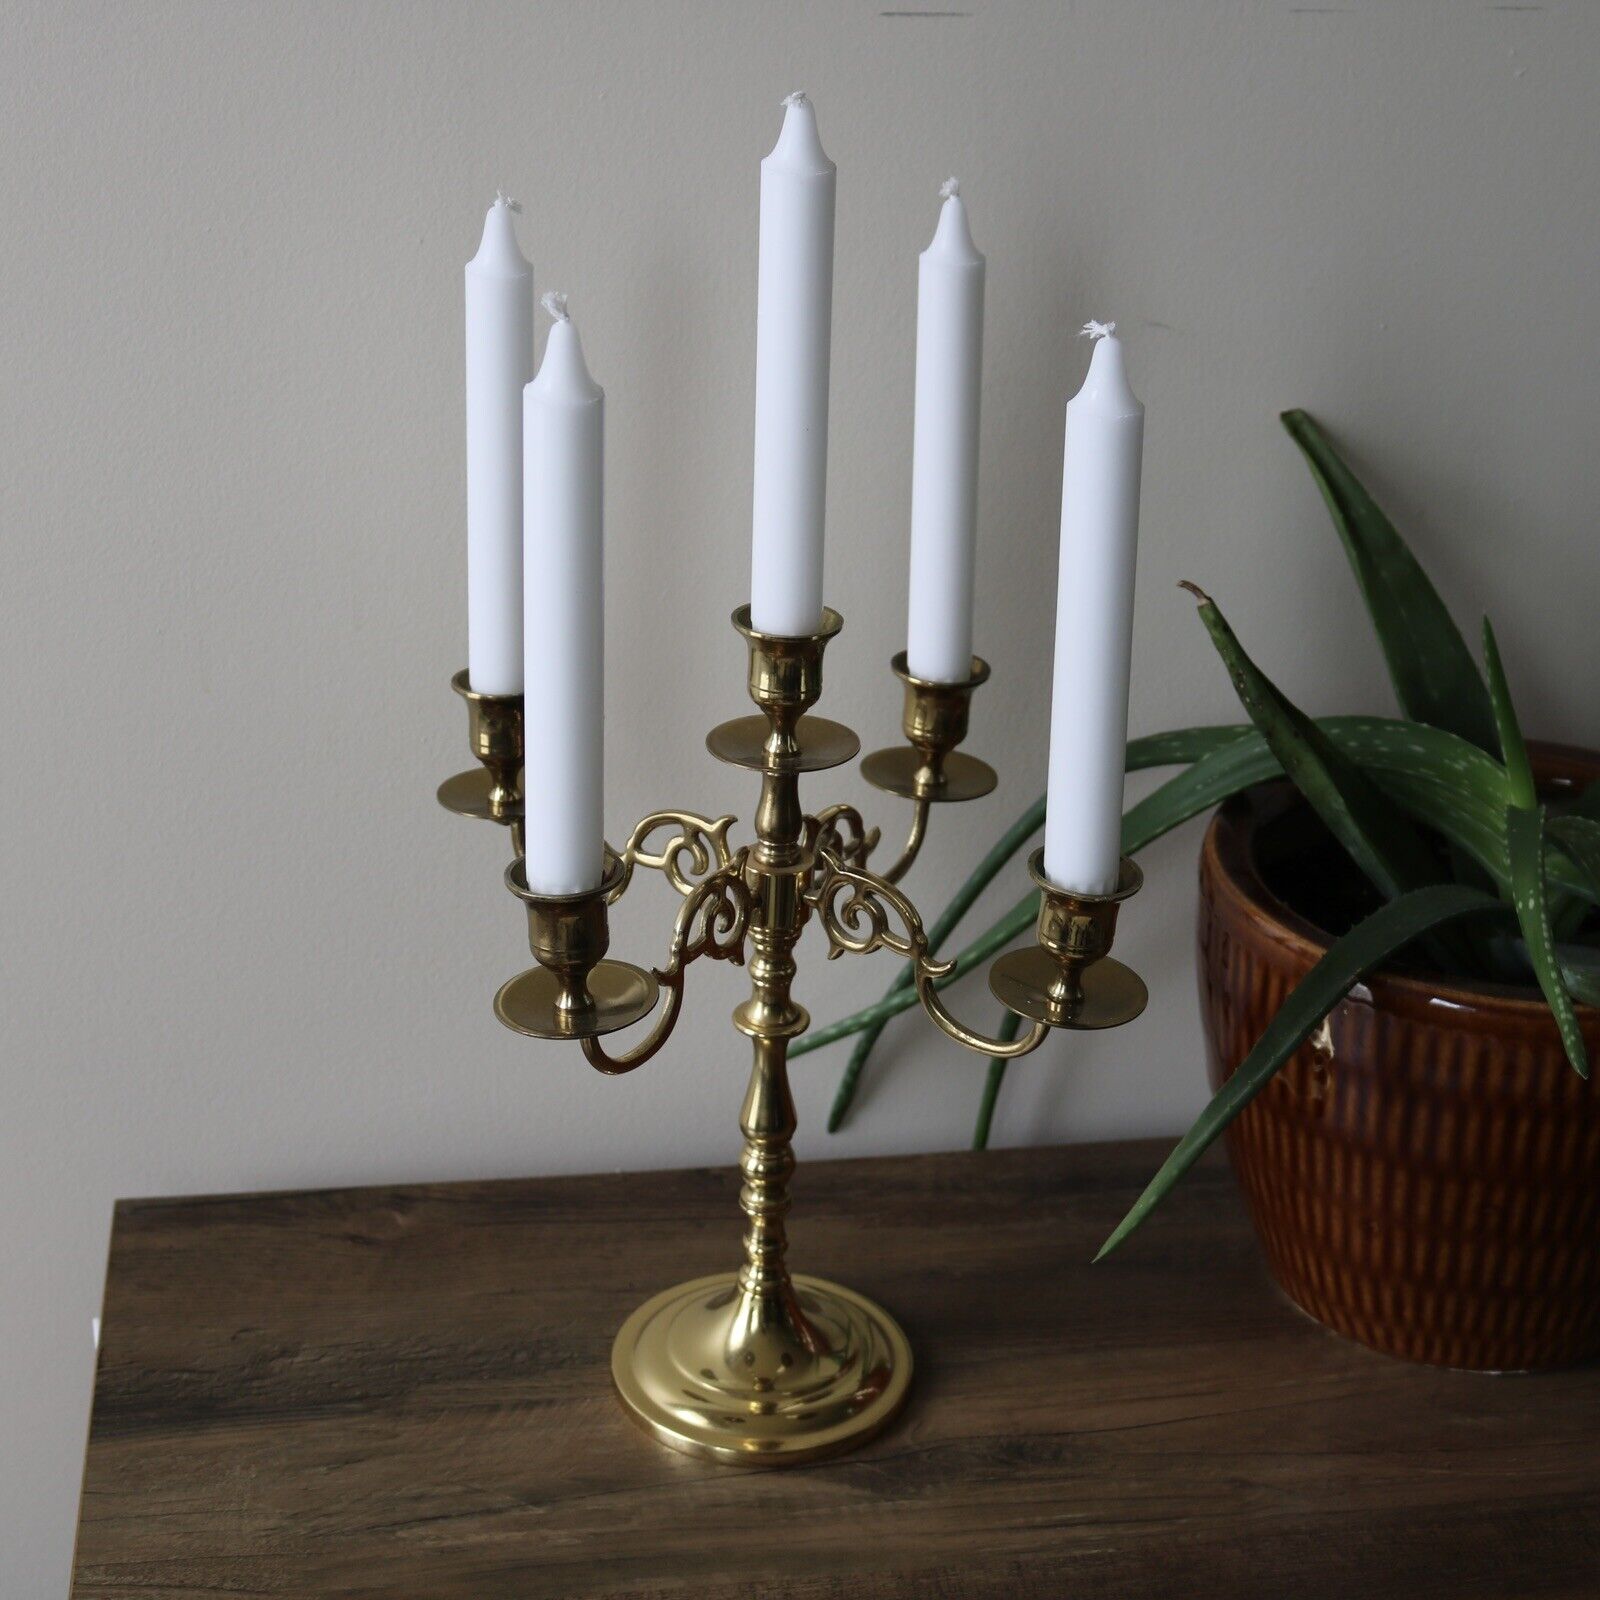 Vintage 11.5” Brass 4 Arm Candelabra, 5 Taper Candle Holders - HEAVY, Marked “M”